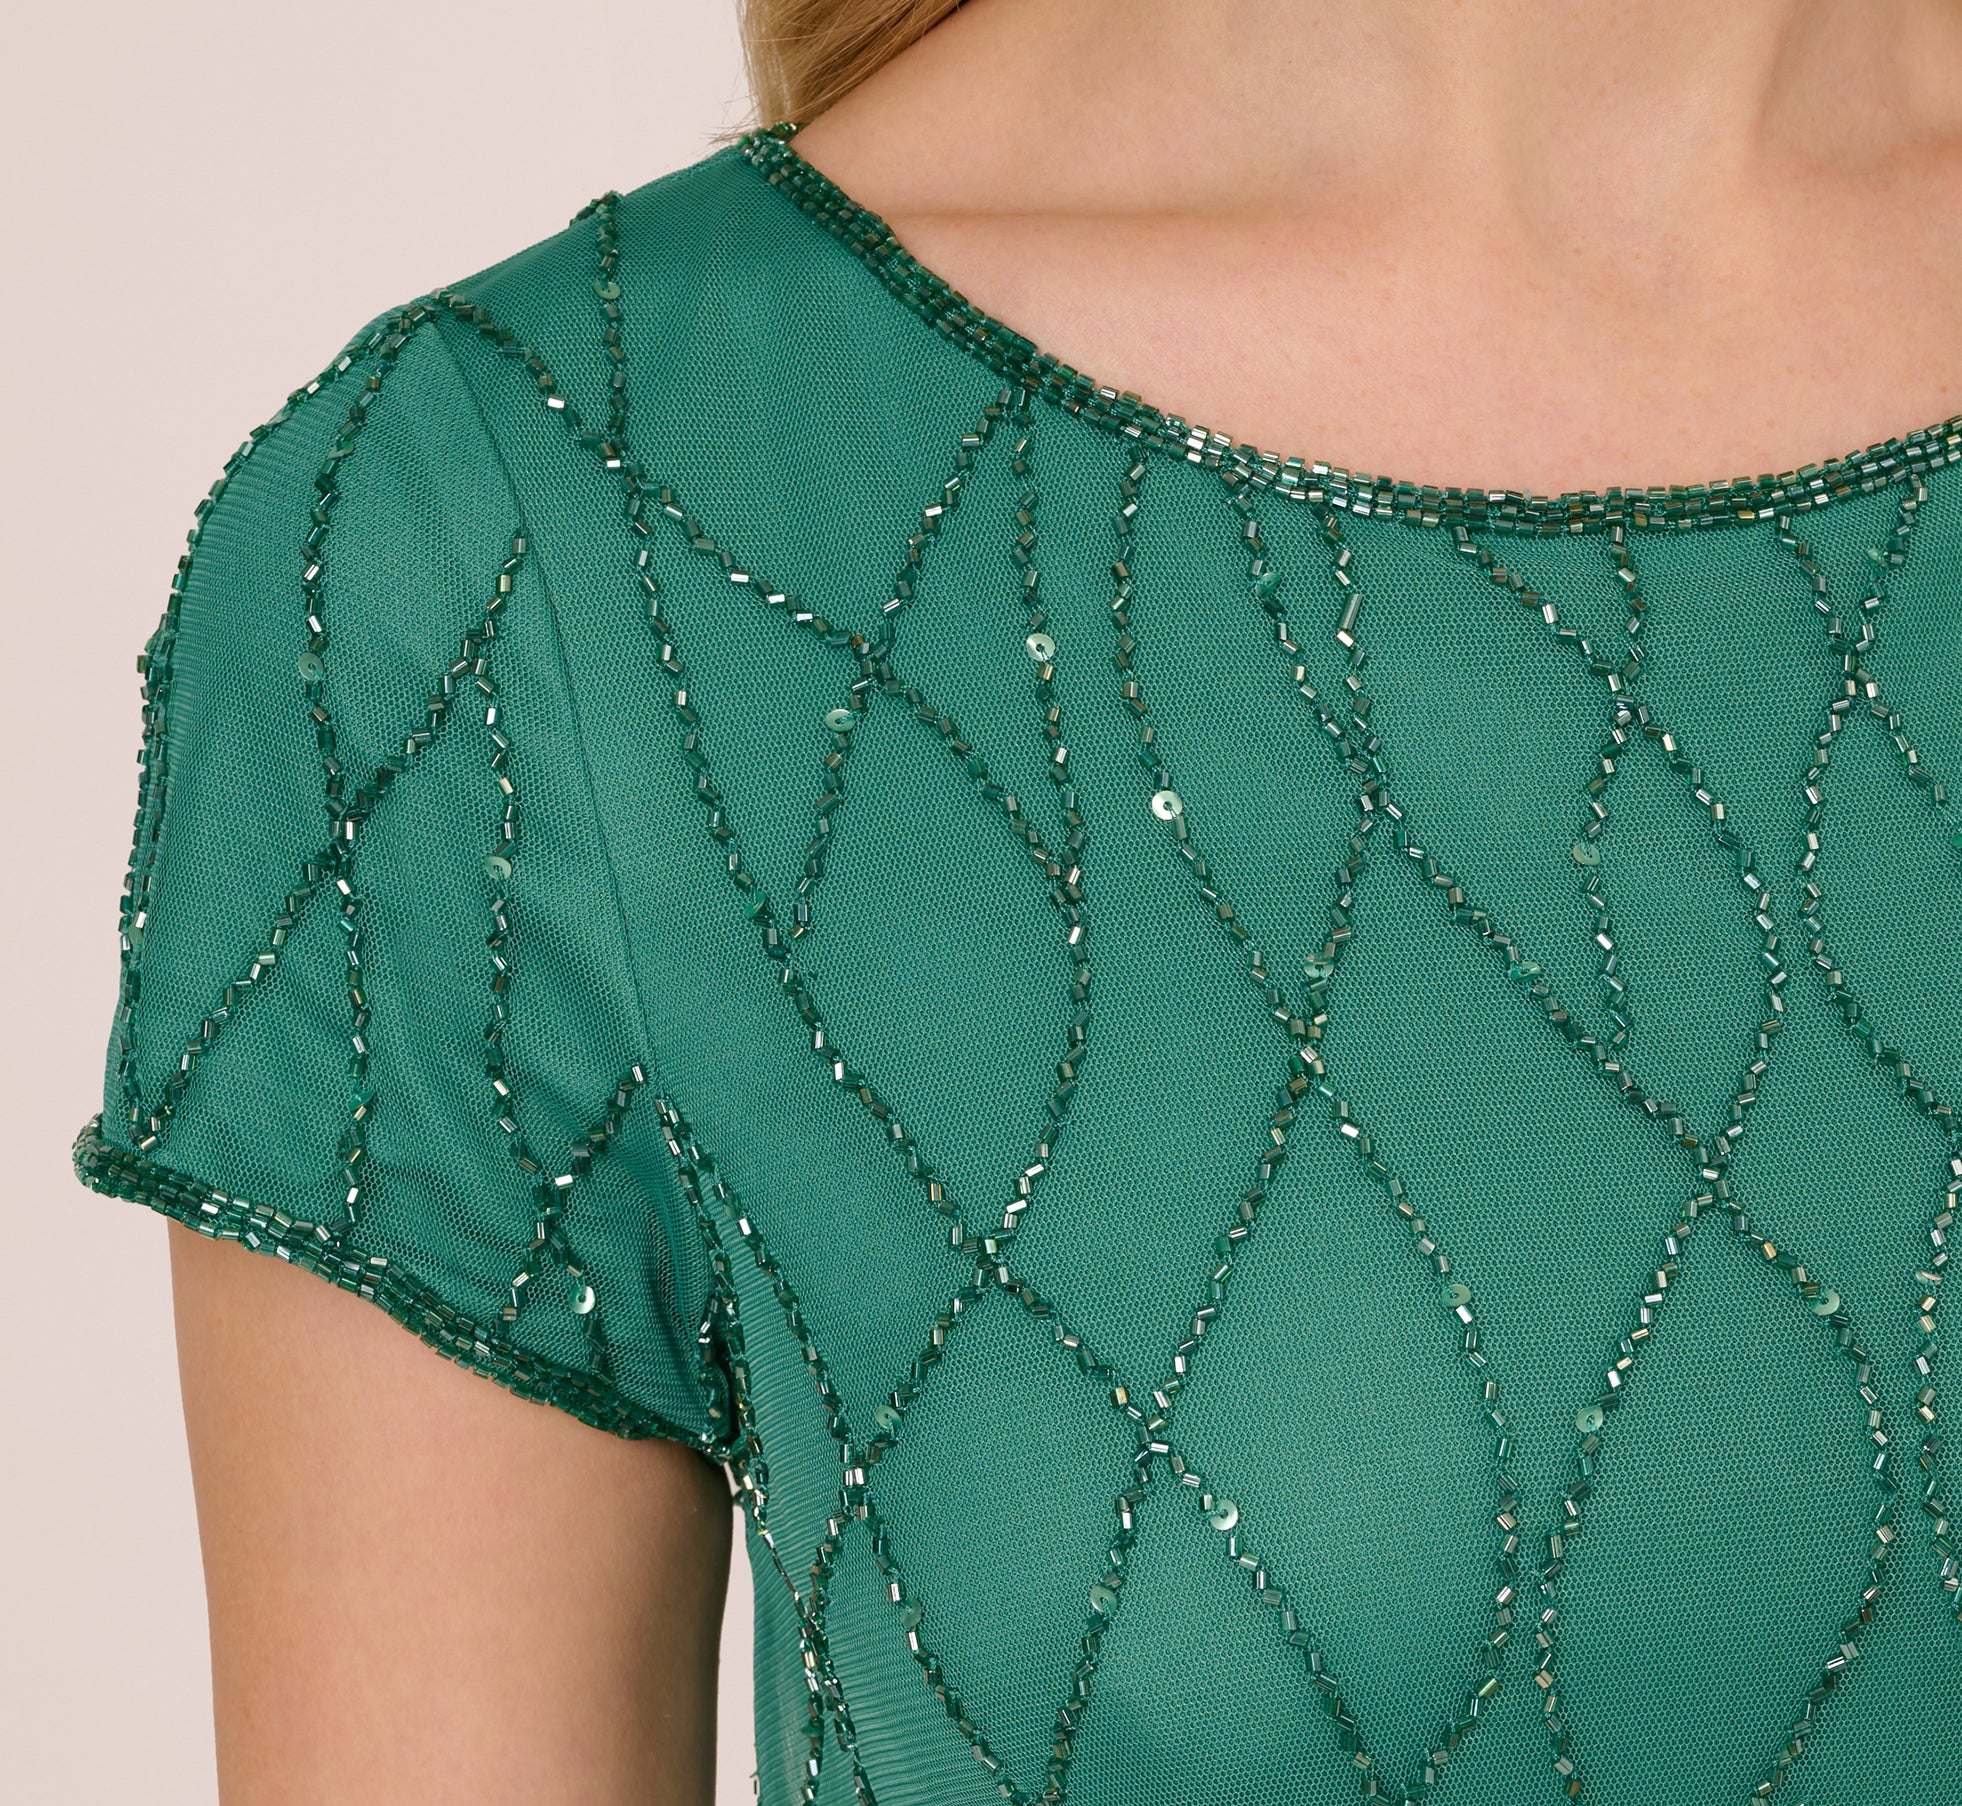 Hand-Beaded Long Dress In Jungle Green | Adrianna Papell